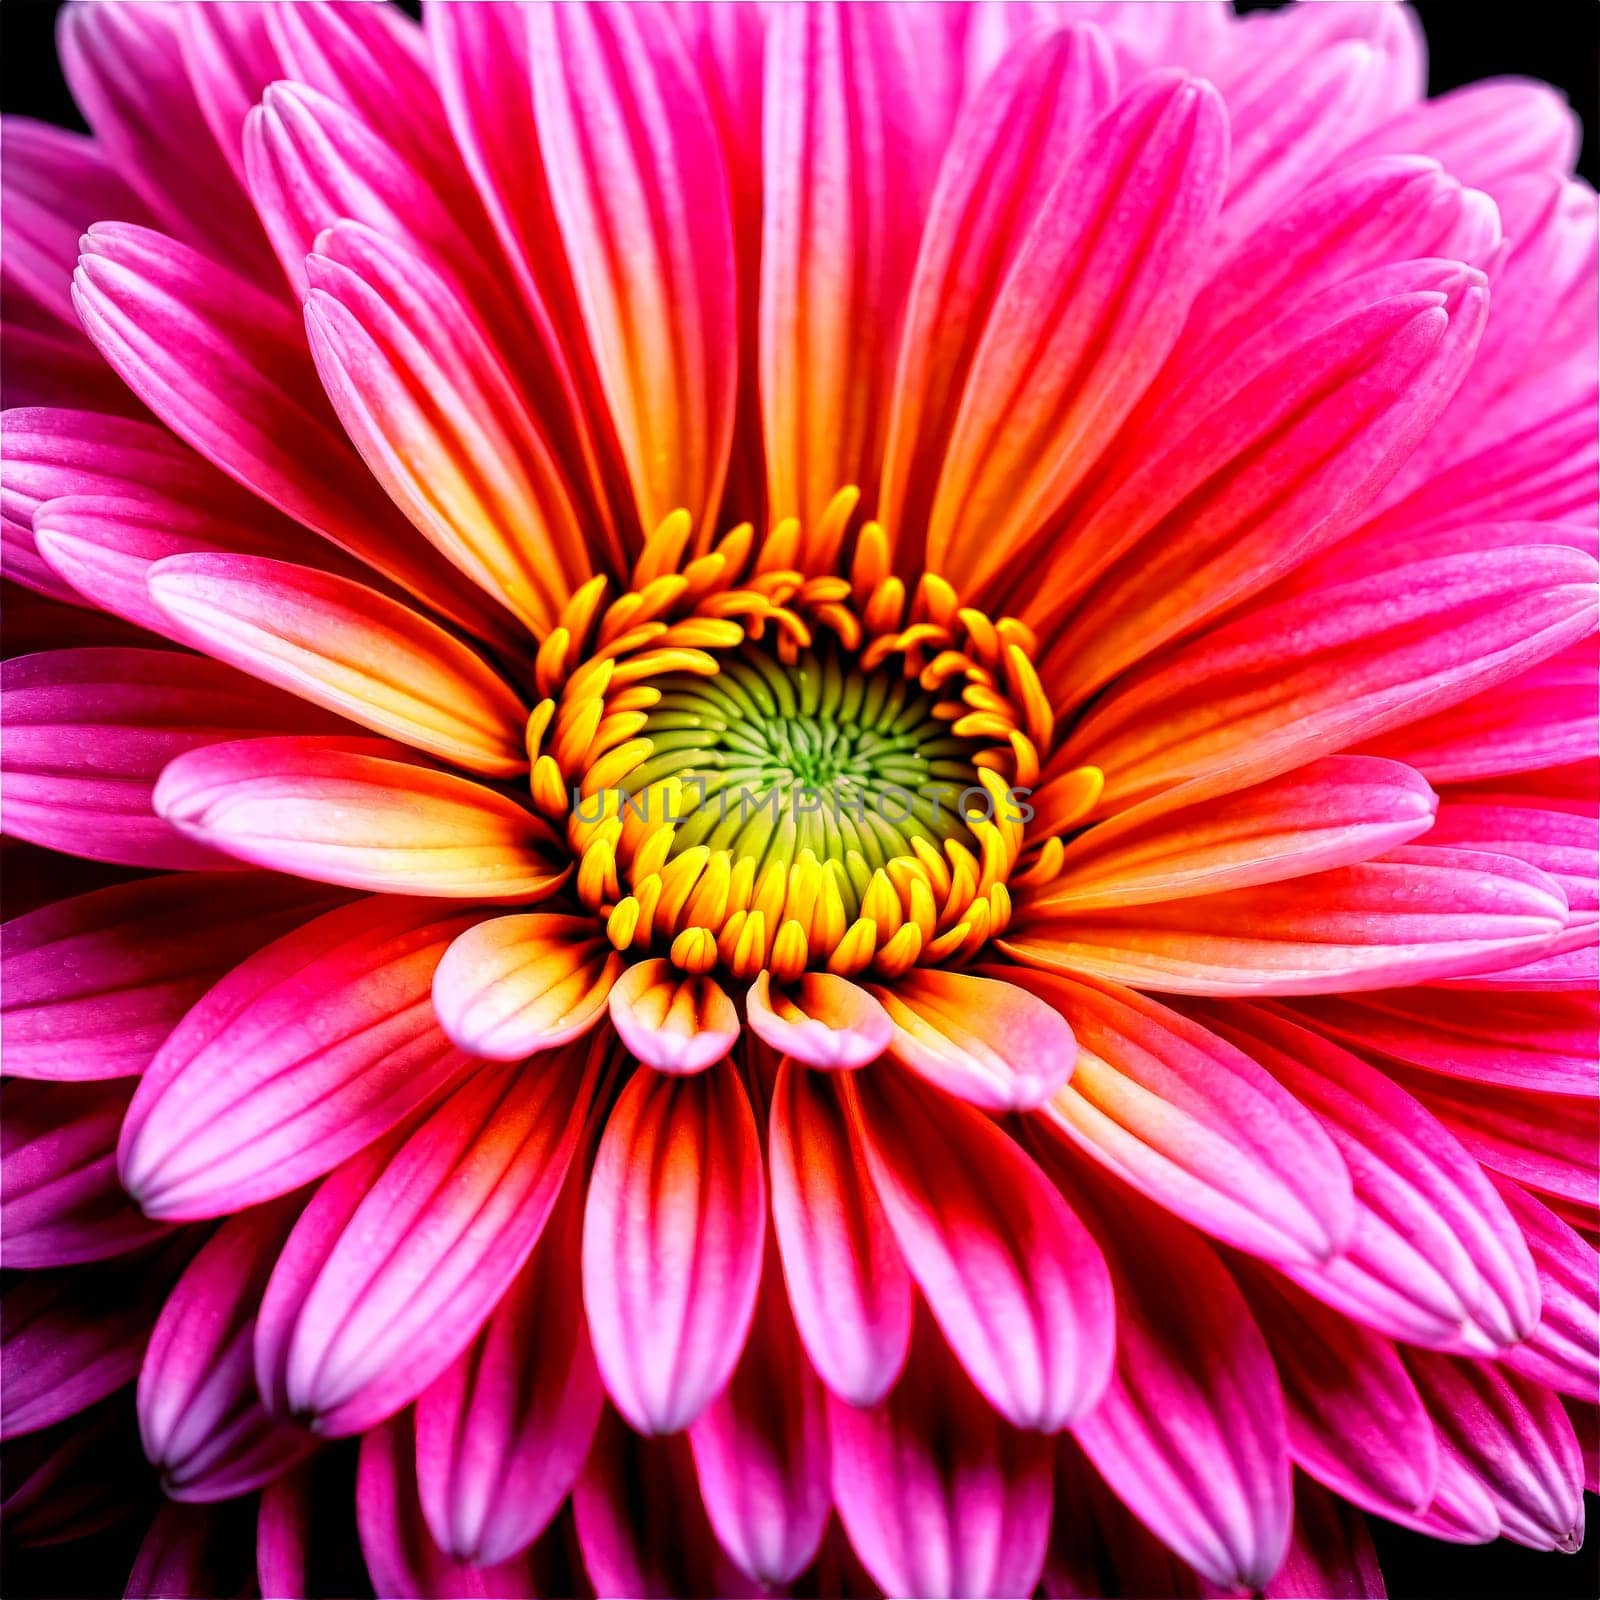 Pink chrysanthemum dense layers of curved petals ombre effect from light pink edges to darker. Flowers isolated on transparent background.